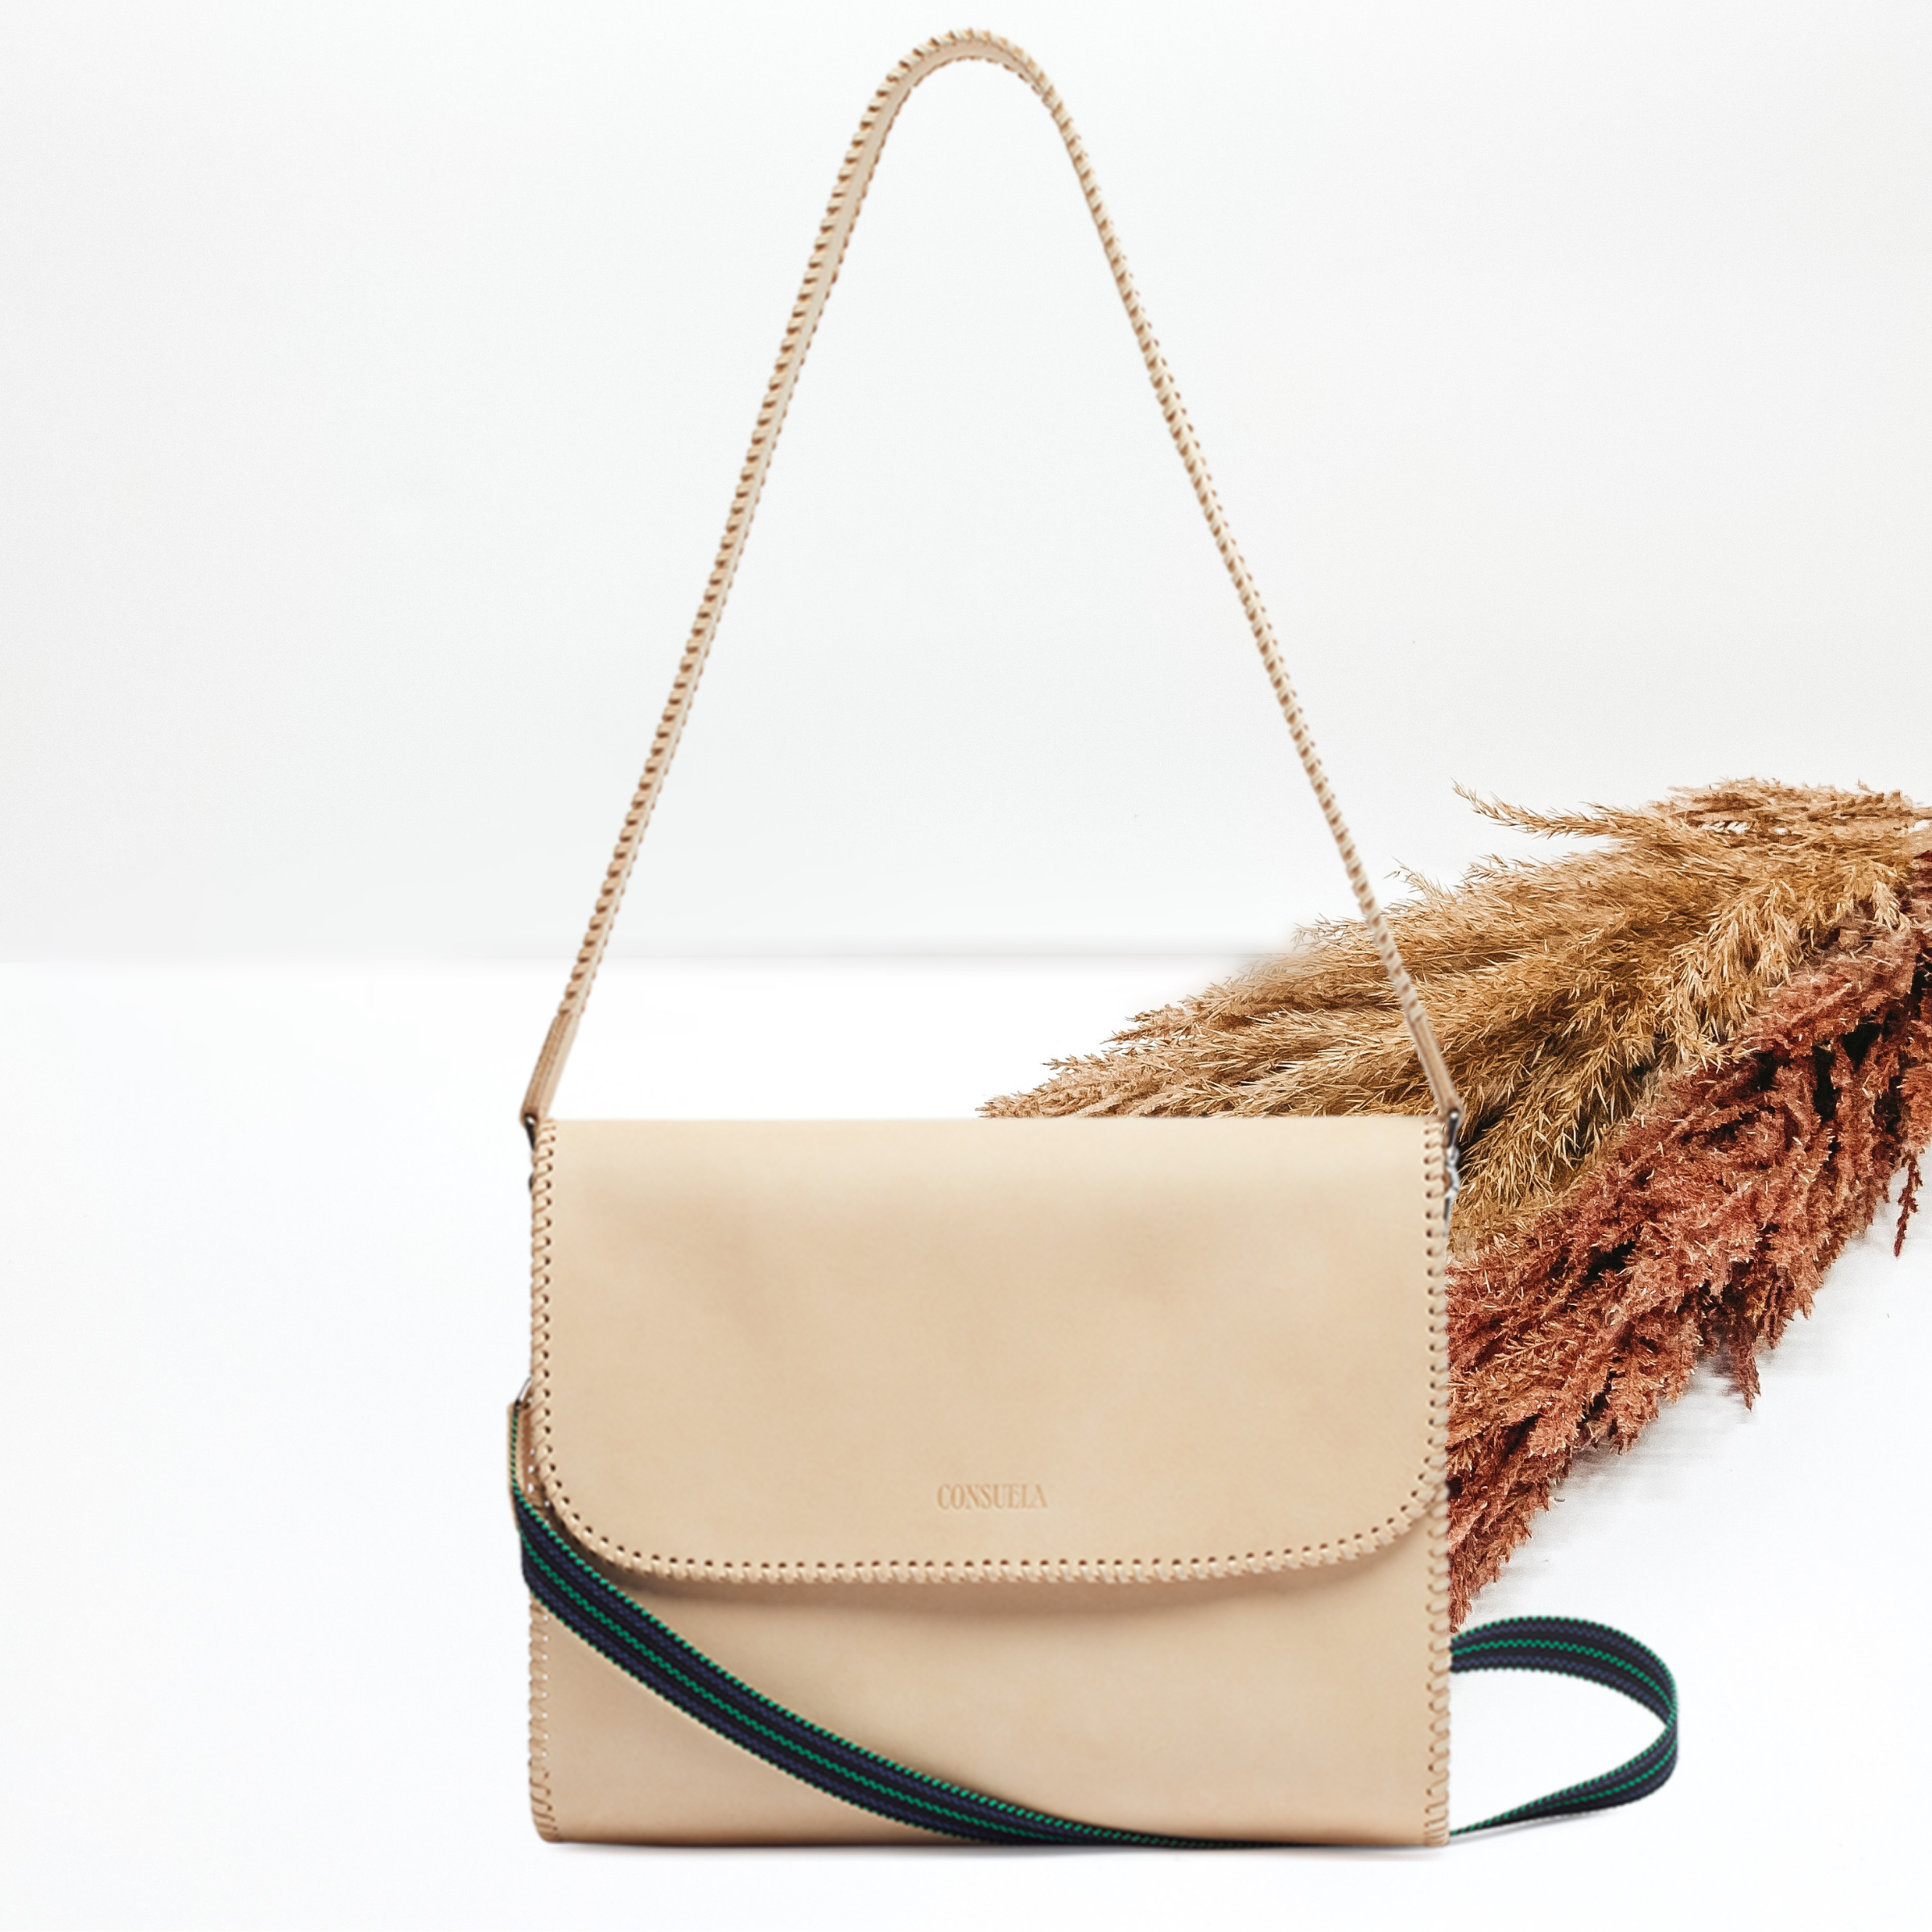 Pictured is a rectangle purse with two different straps. This purse is a light tan leather all over design. This purse is pictured on a white background with pompous grass on the right side of the picture.